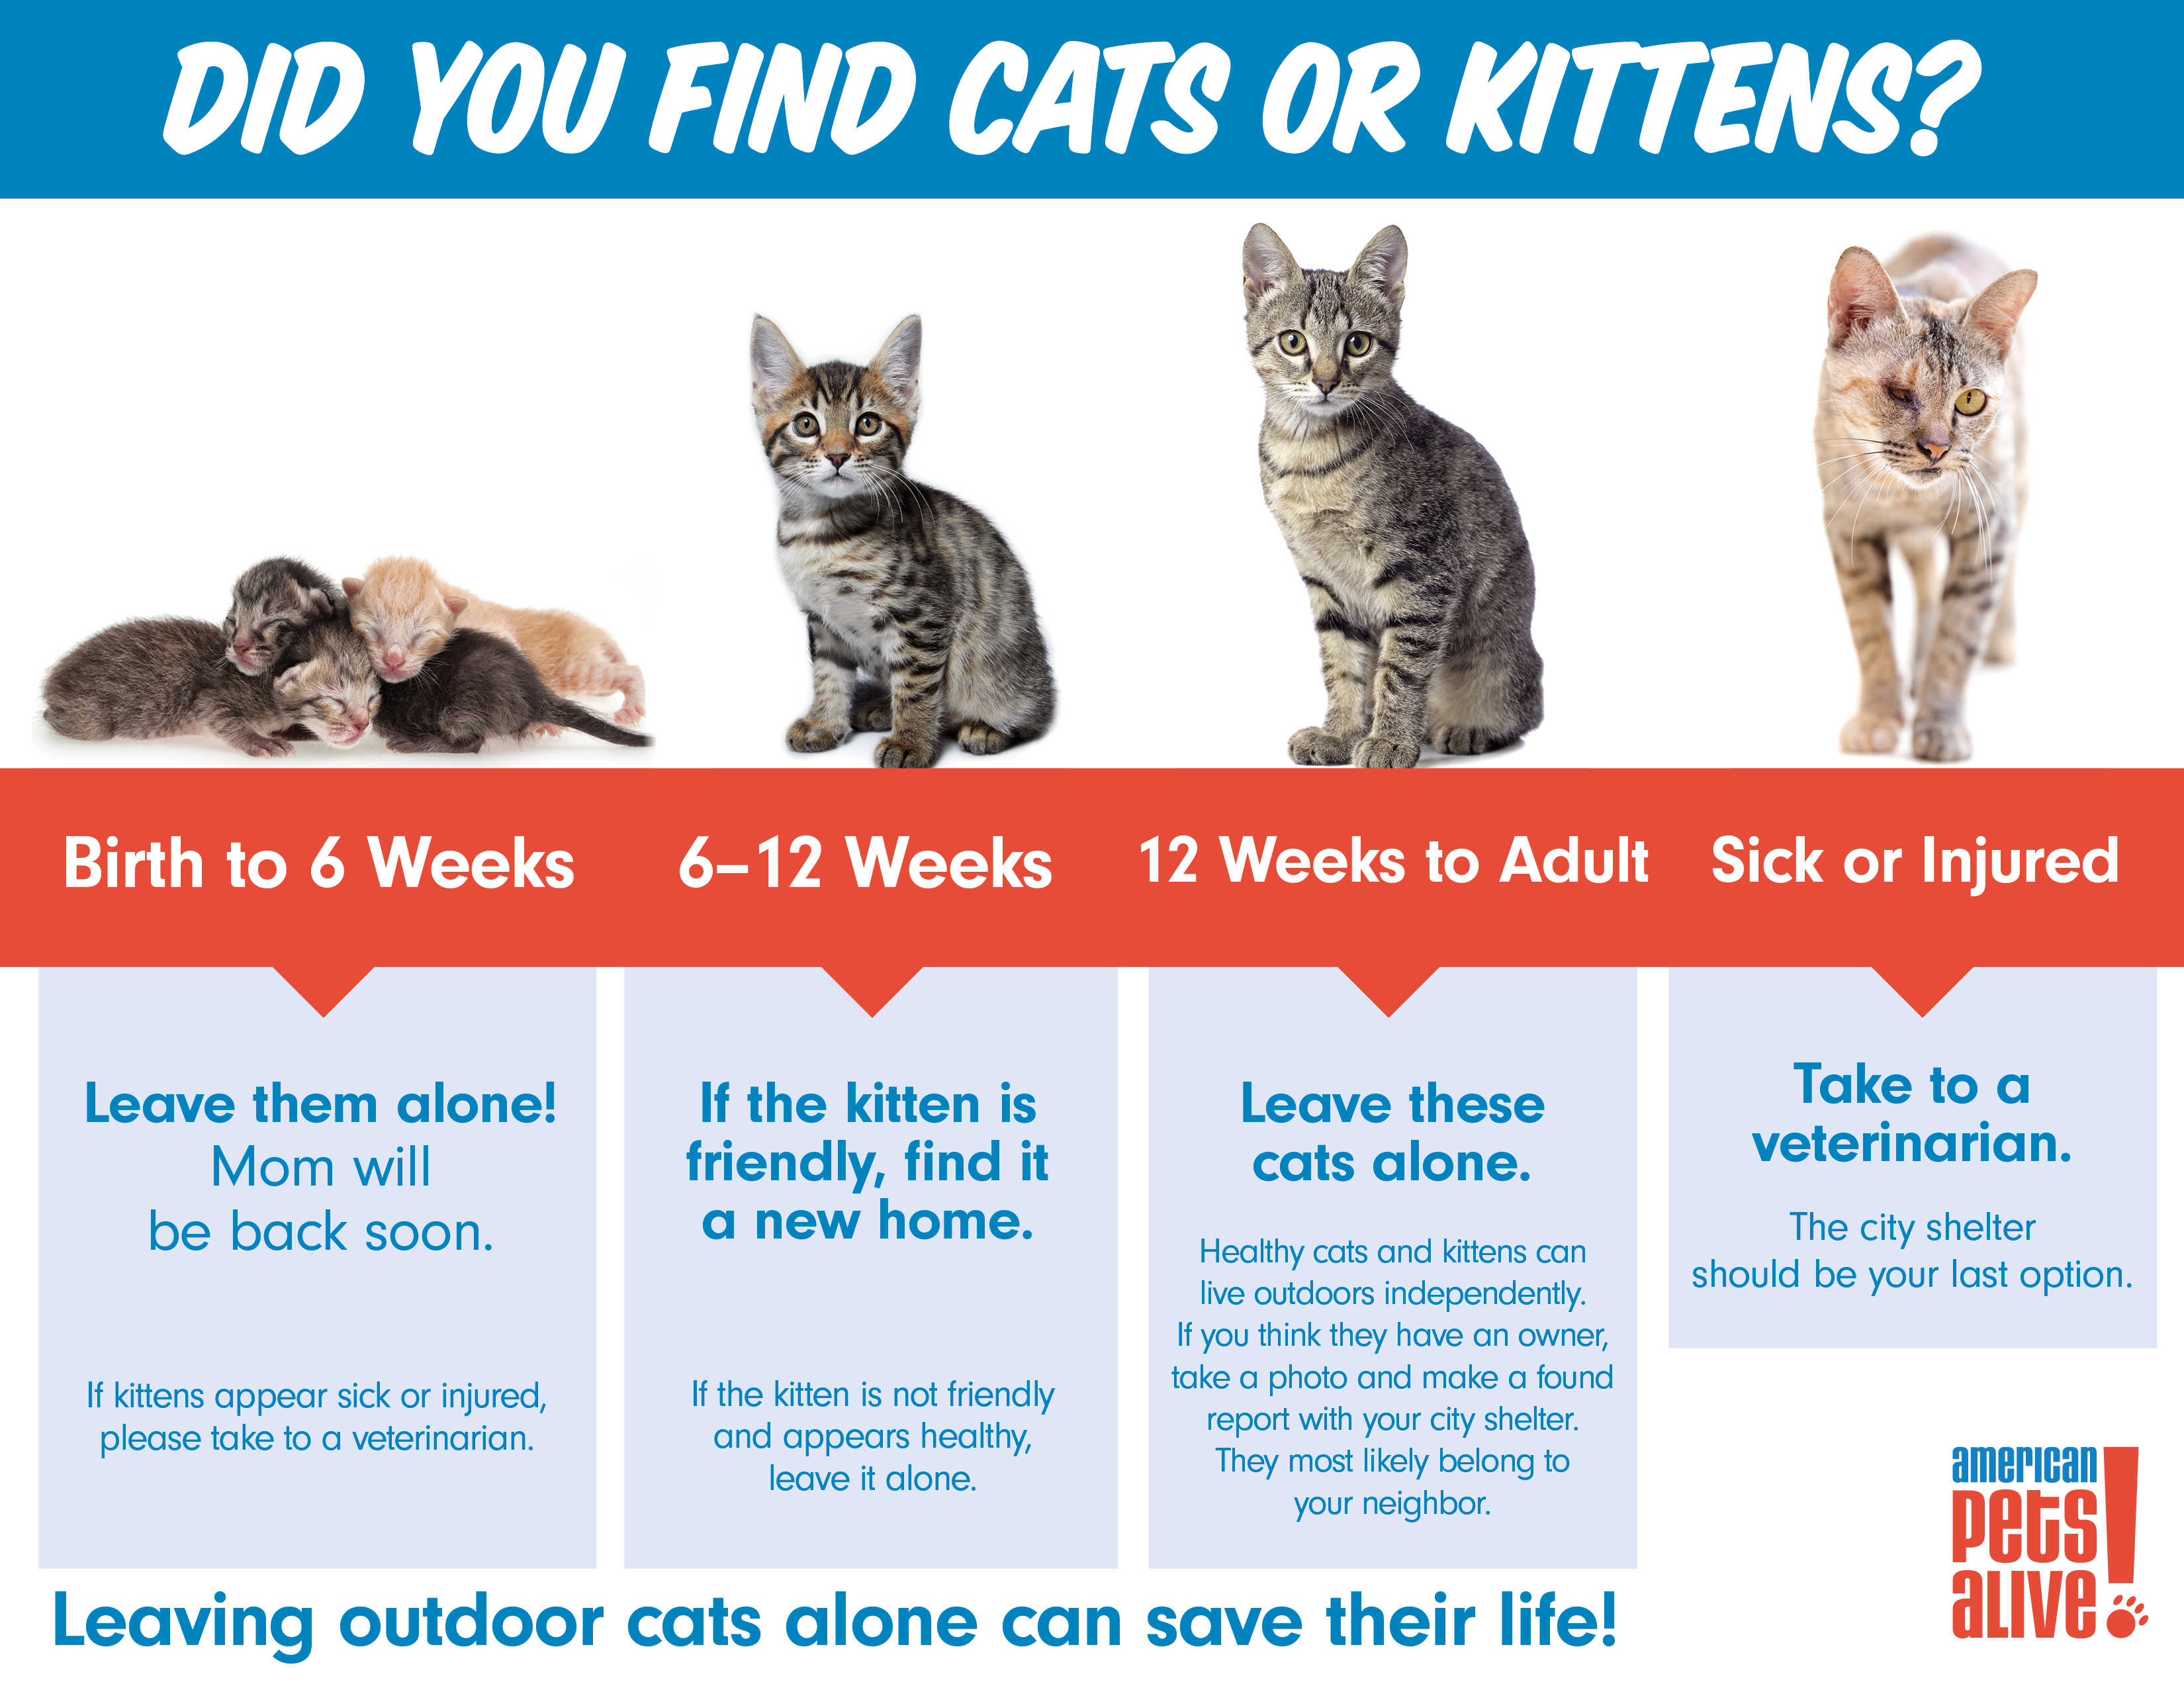 What to Do Found Cats or Kittens Infographic